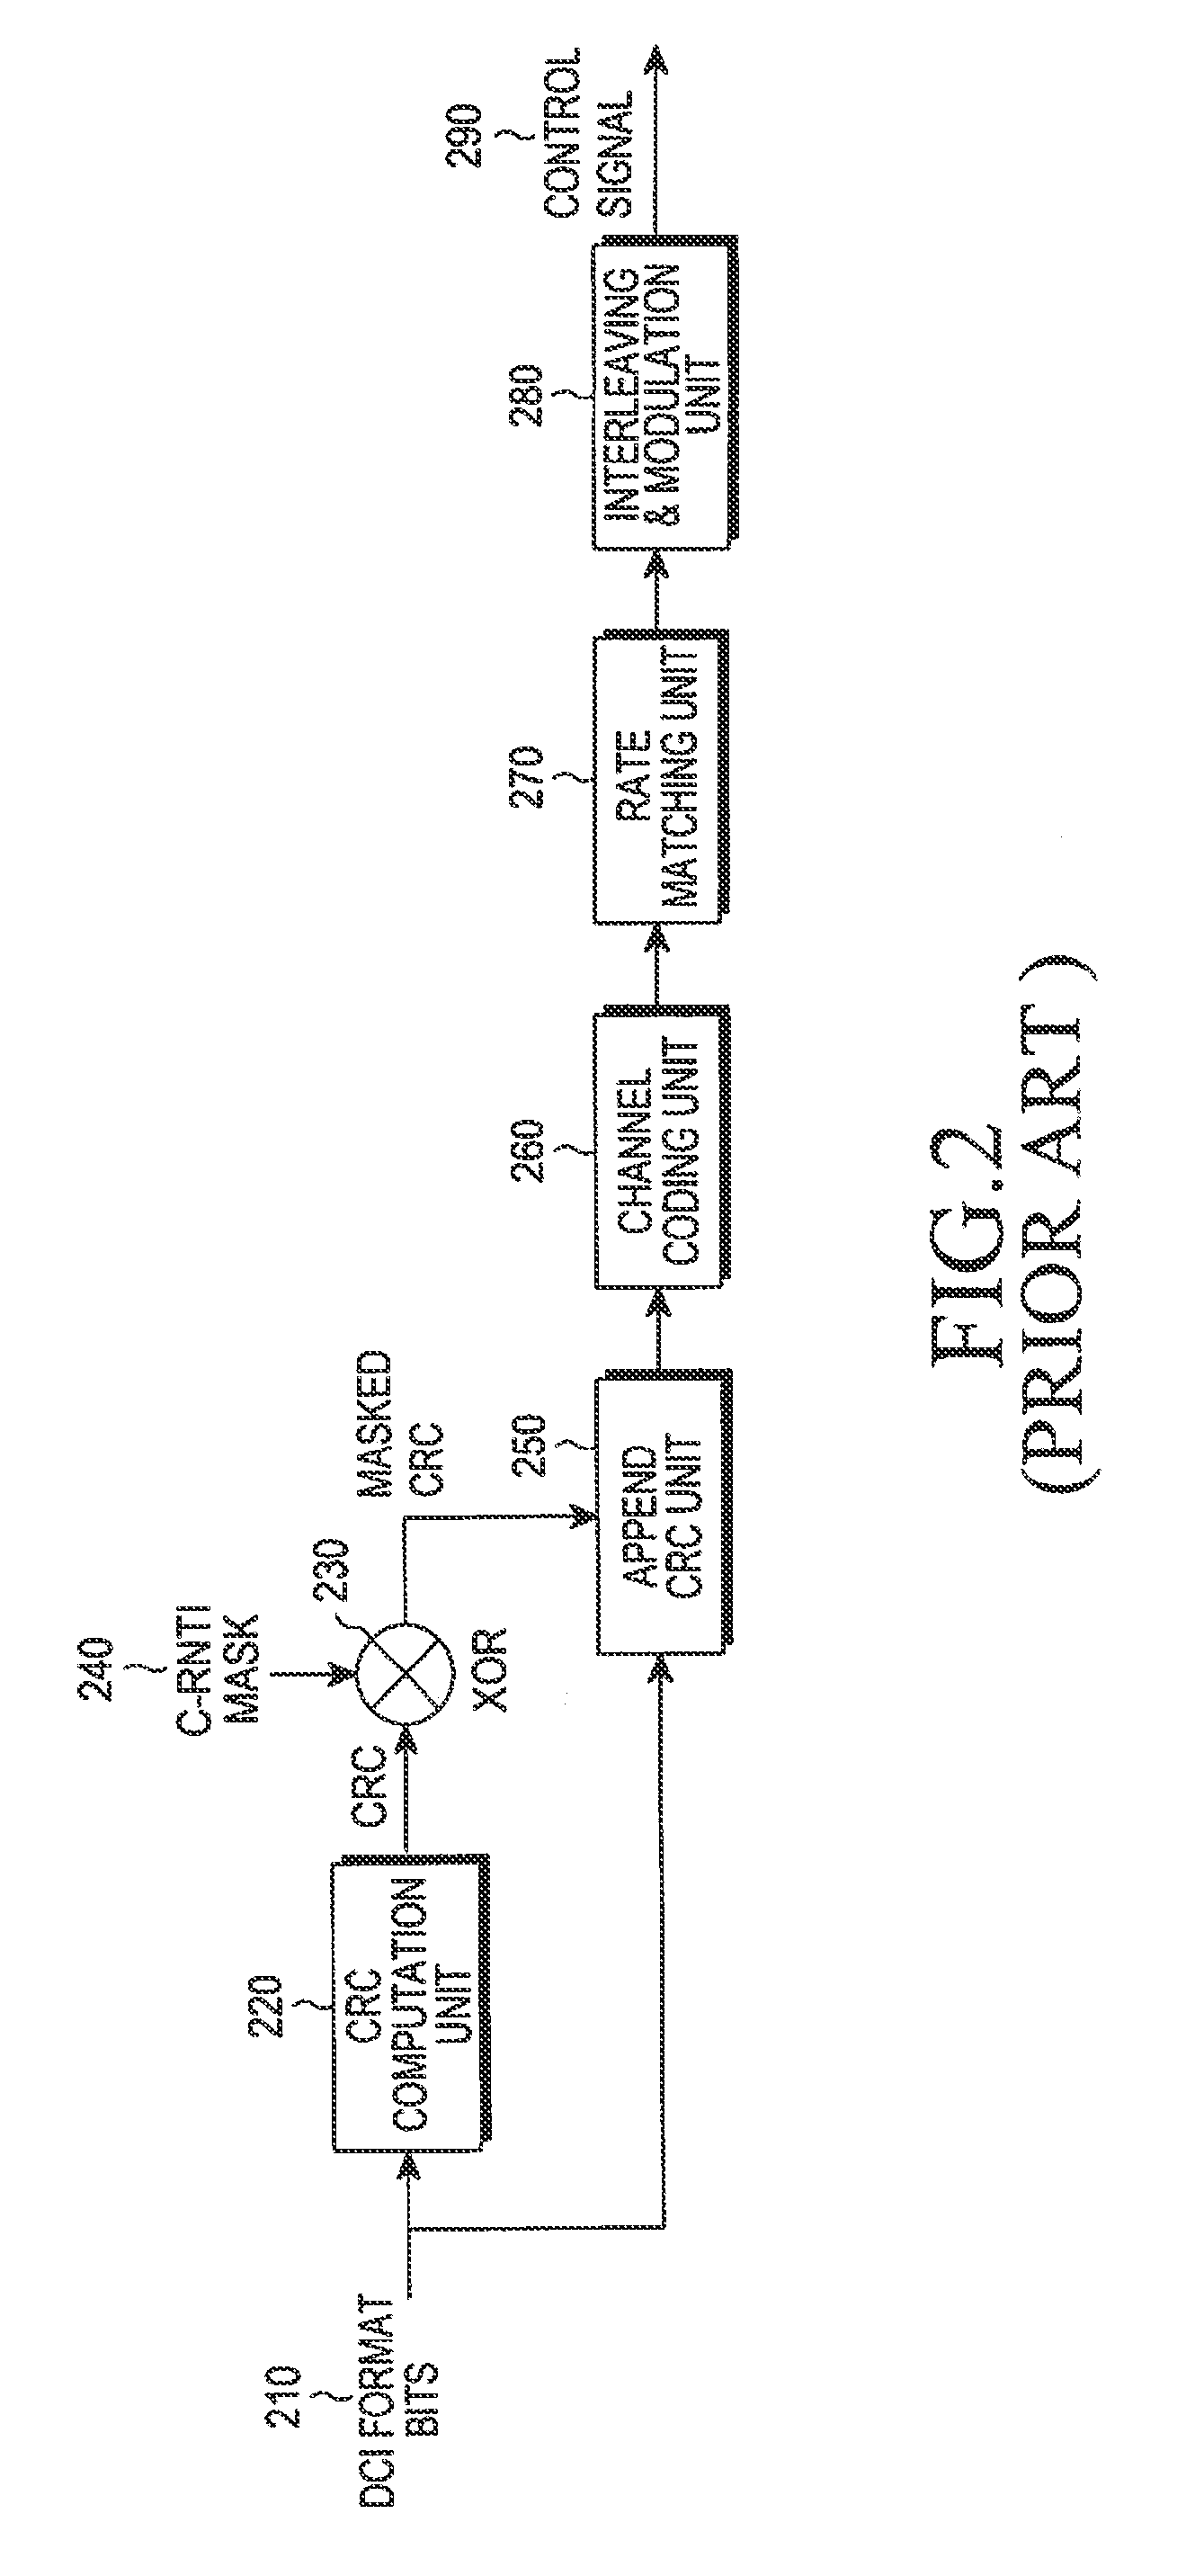 Harq-ack signal transmission in response to detection of control channel type in case of multiple control channel types